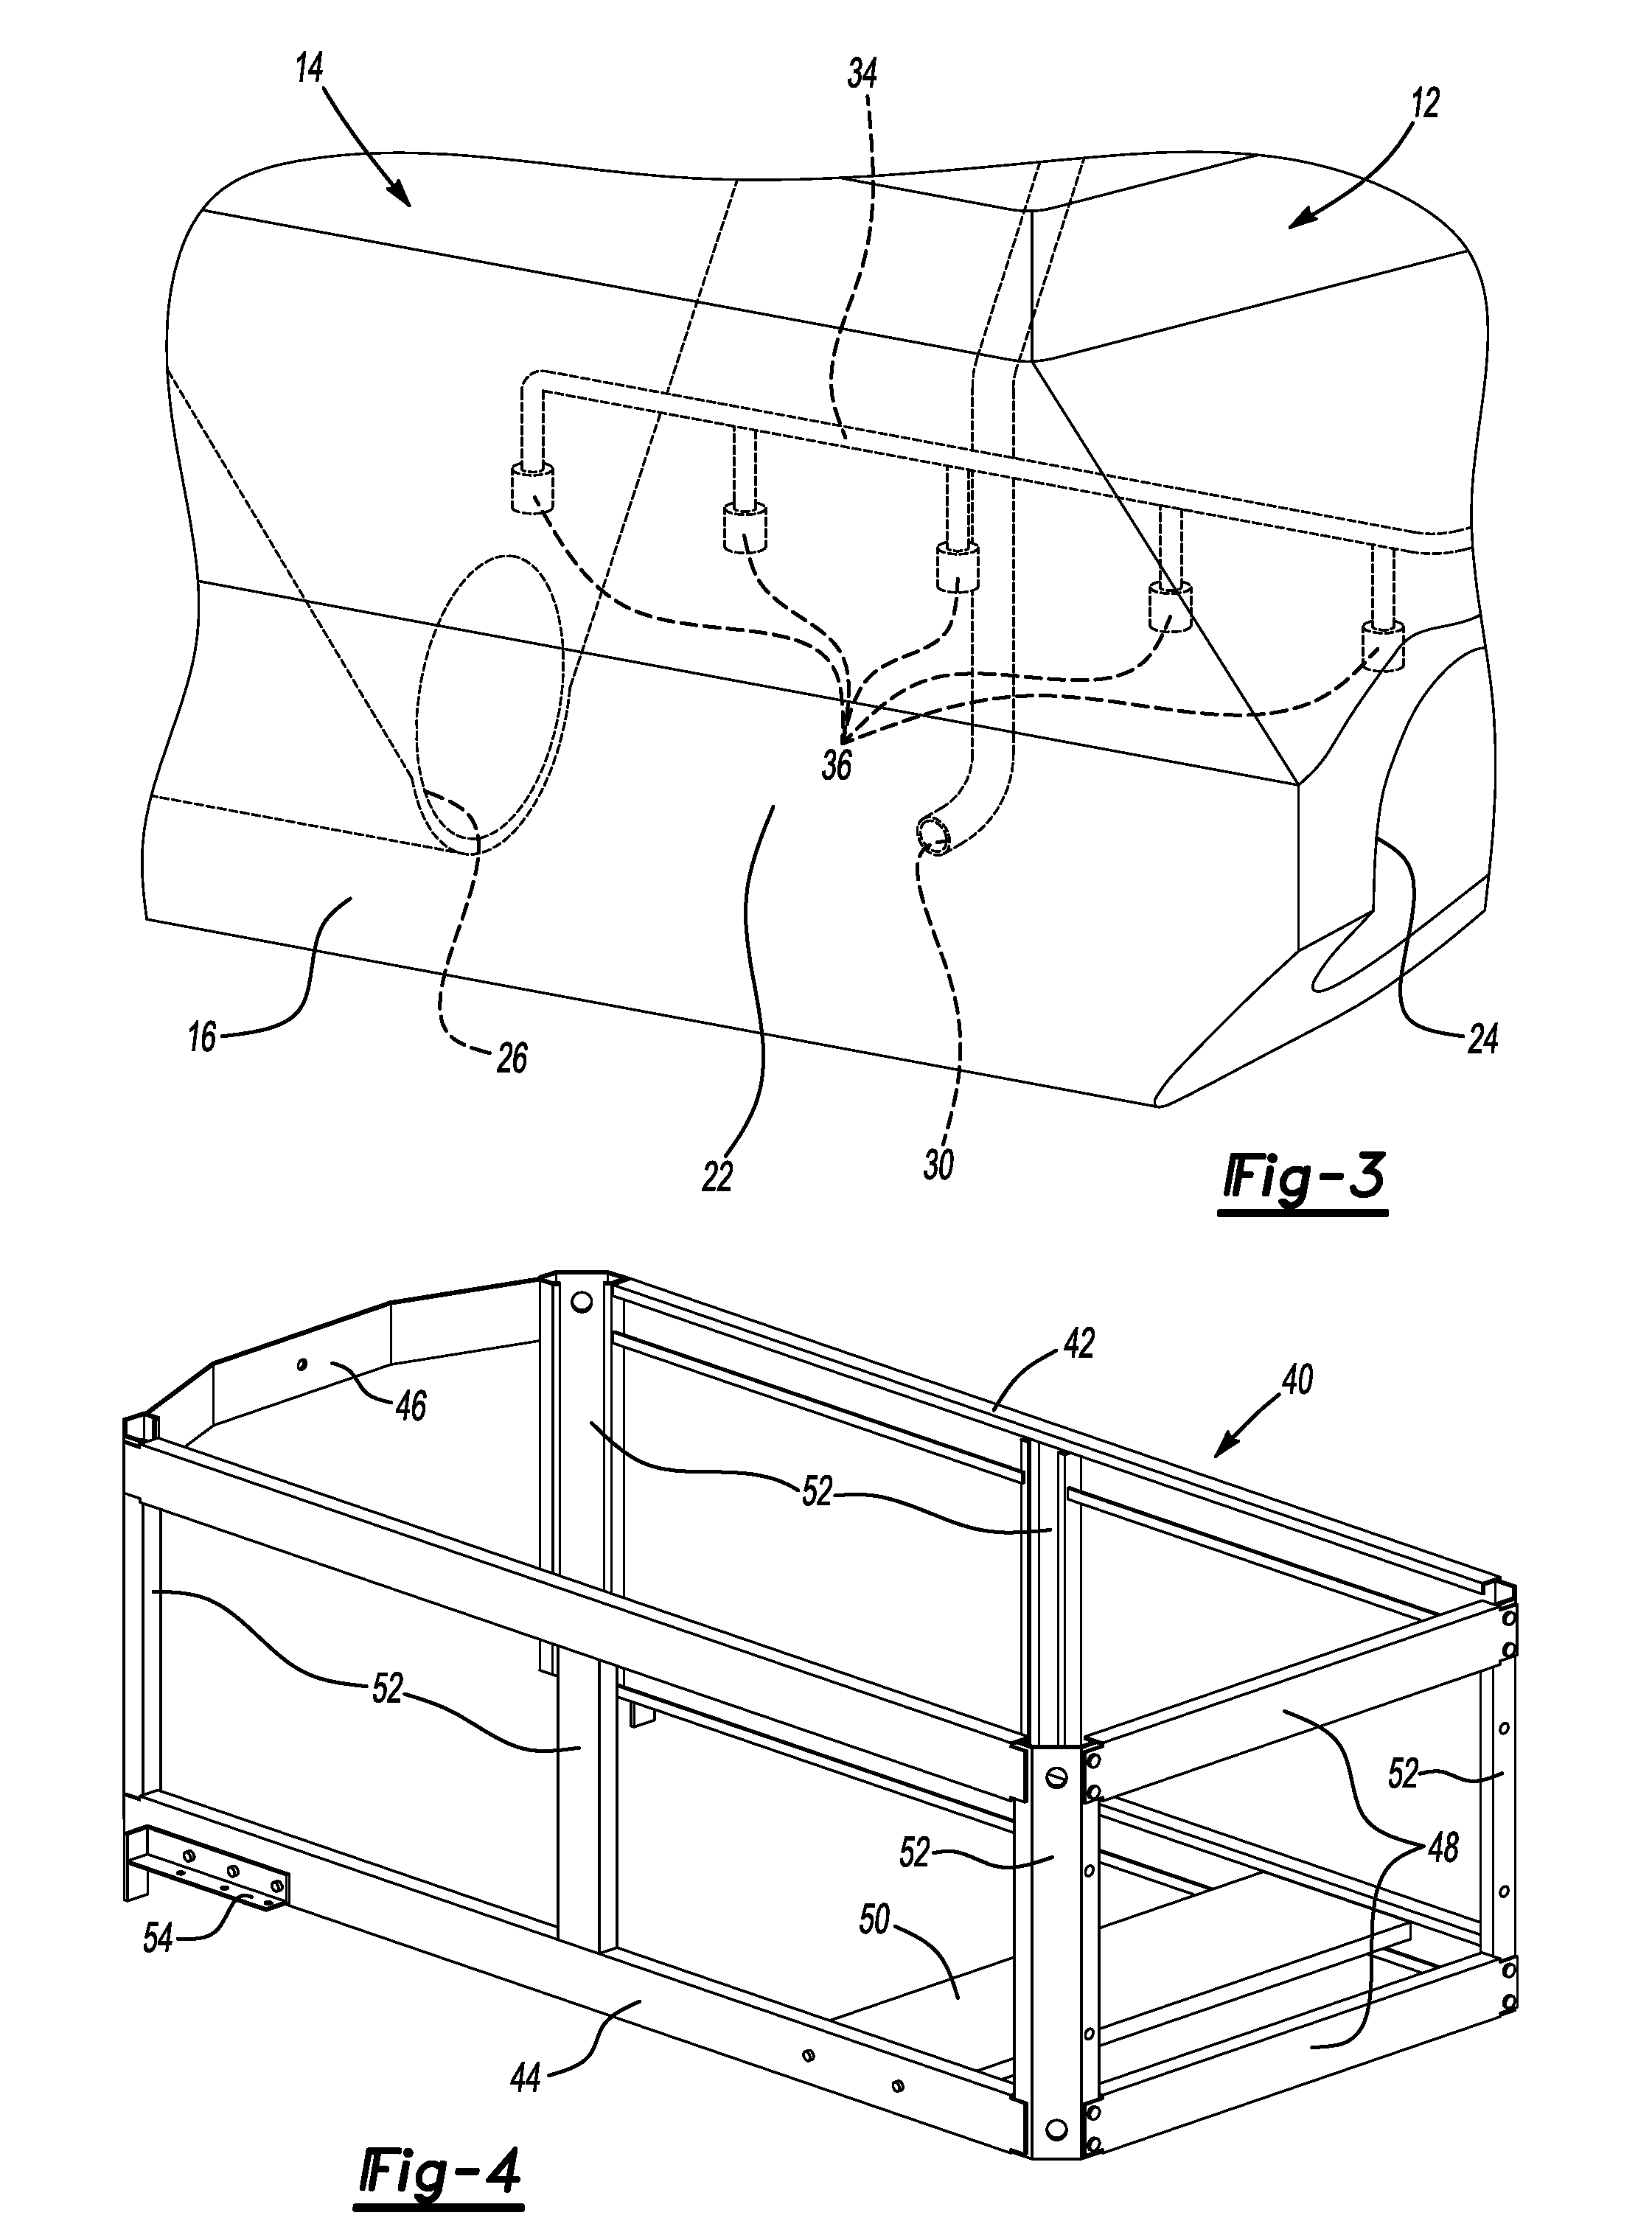 Material spreader with integrated wetting system